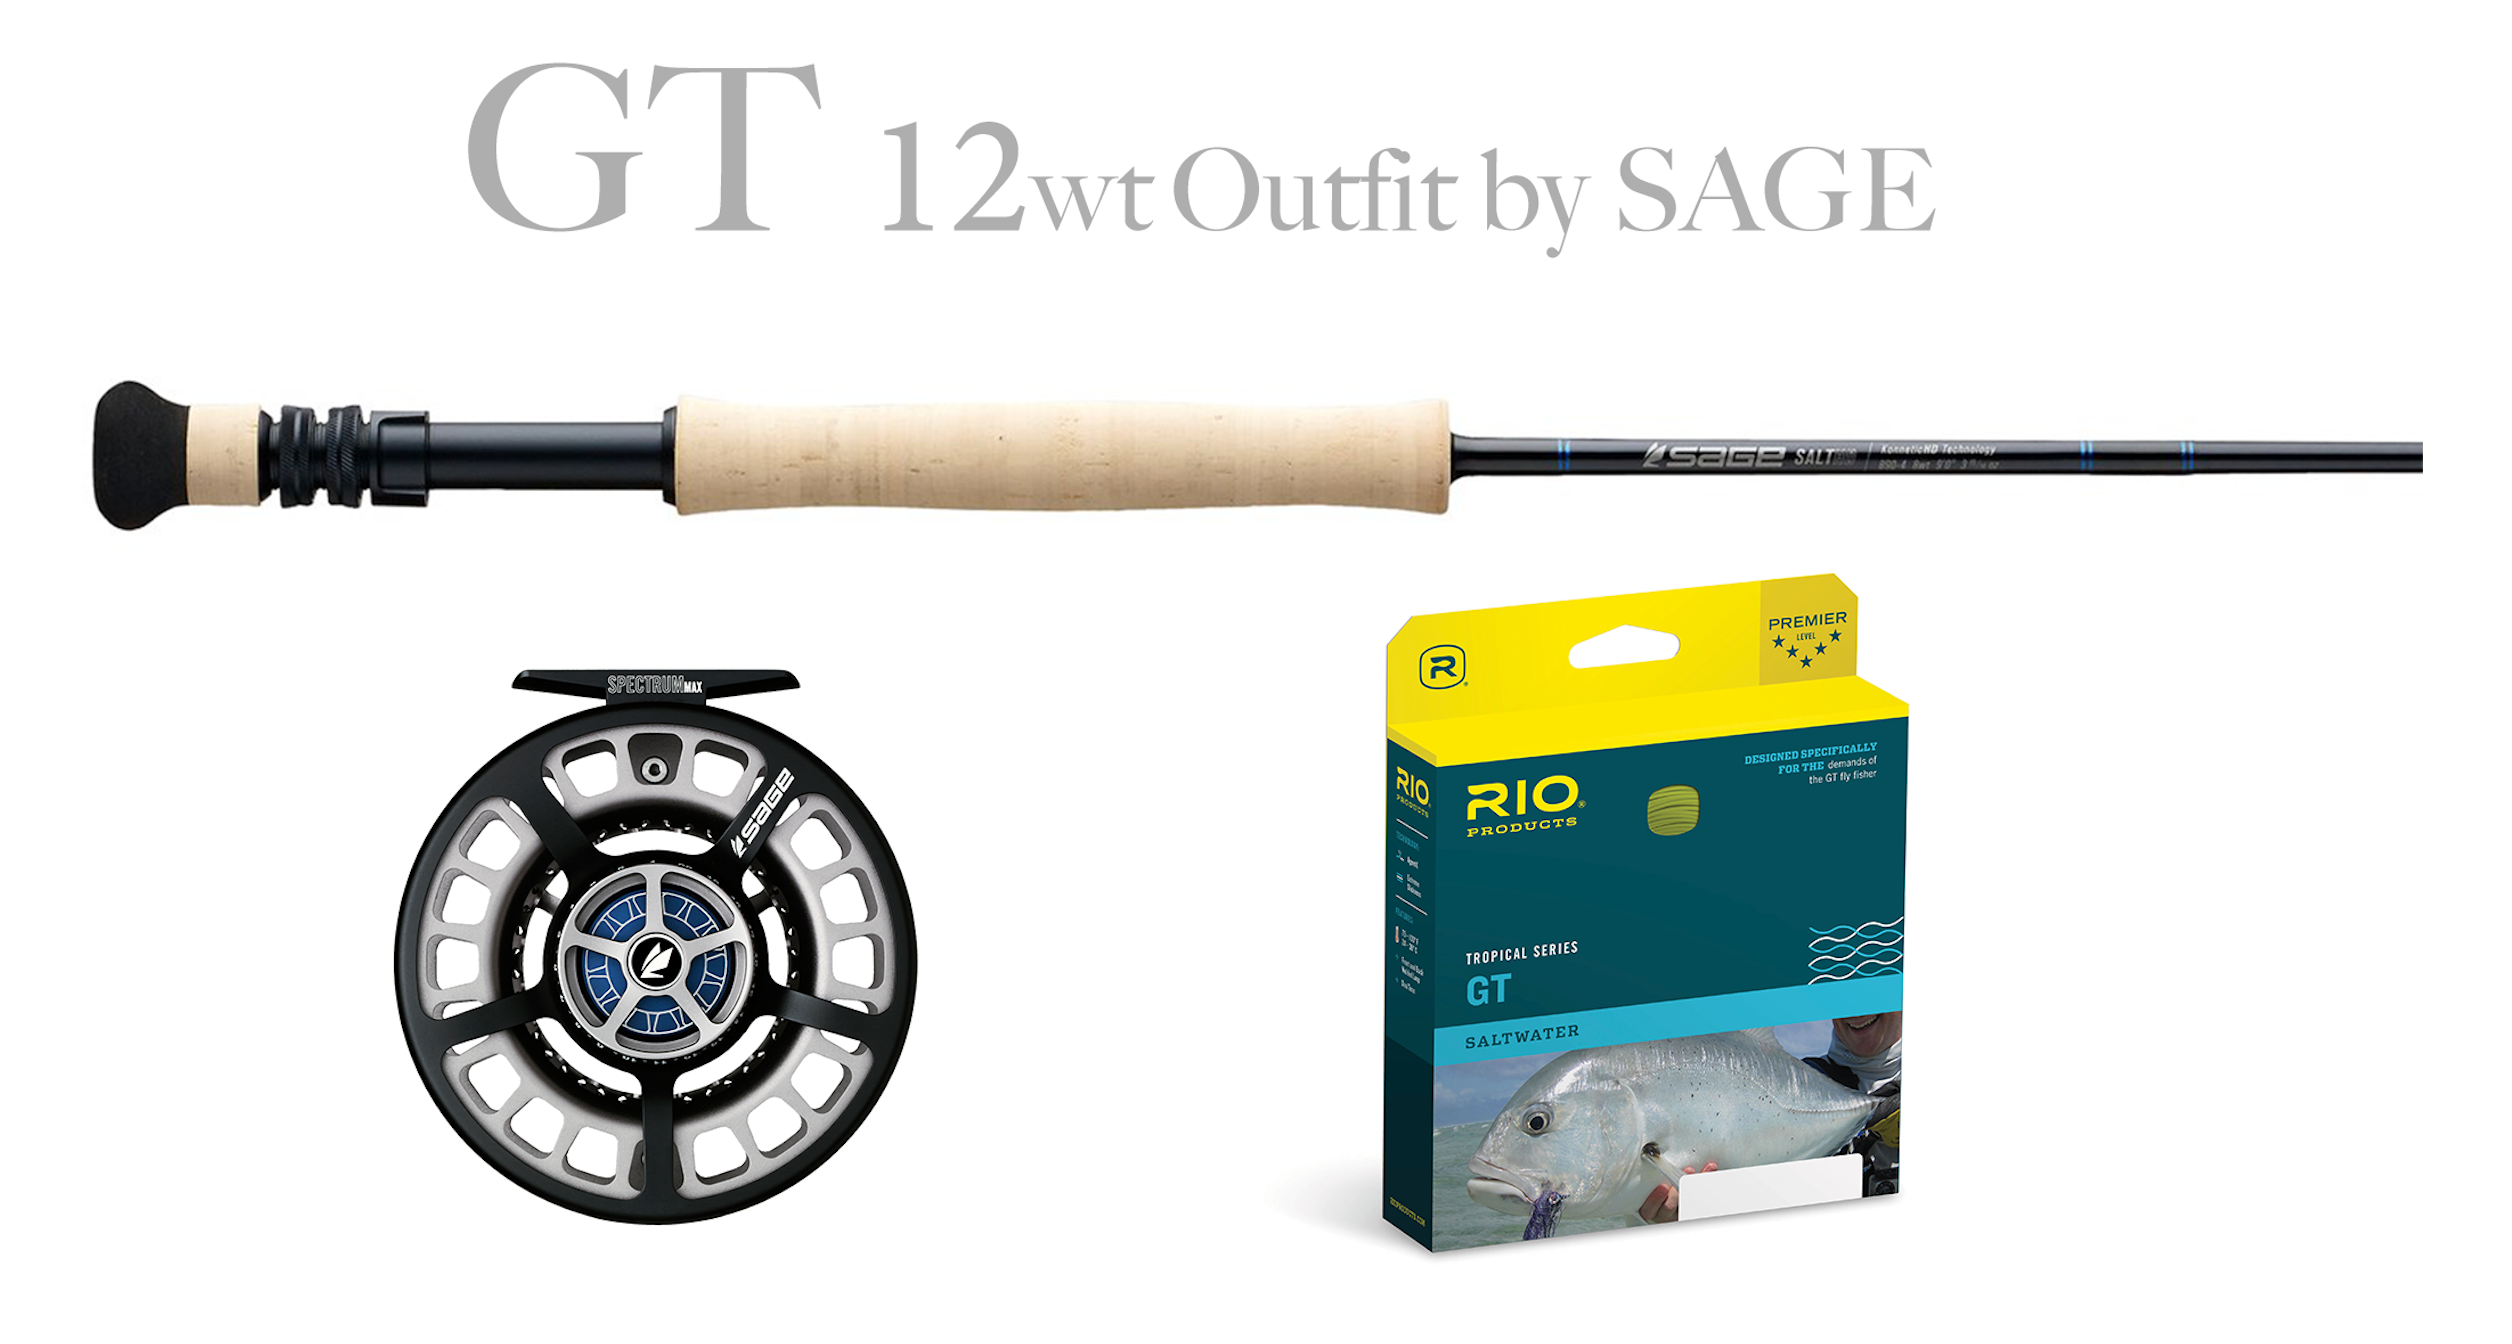 Sage SALT HD 12wt GT GIANT TREVALLY Combo - Discontinued